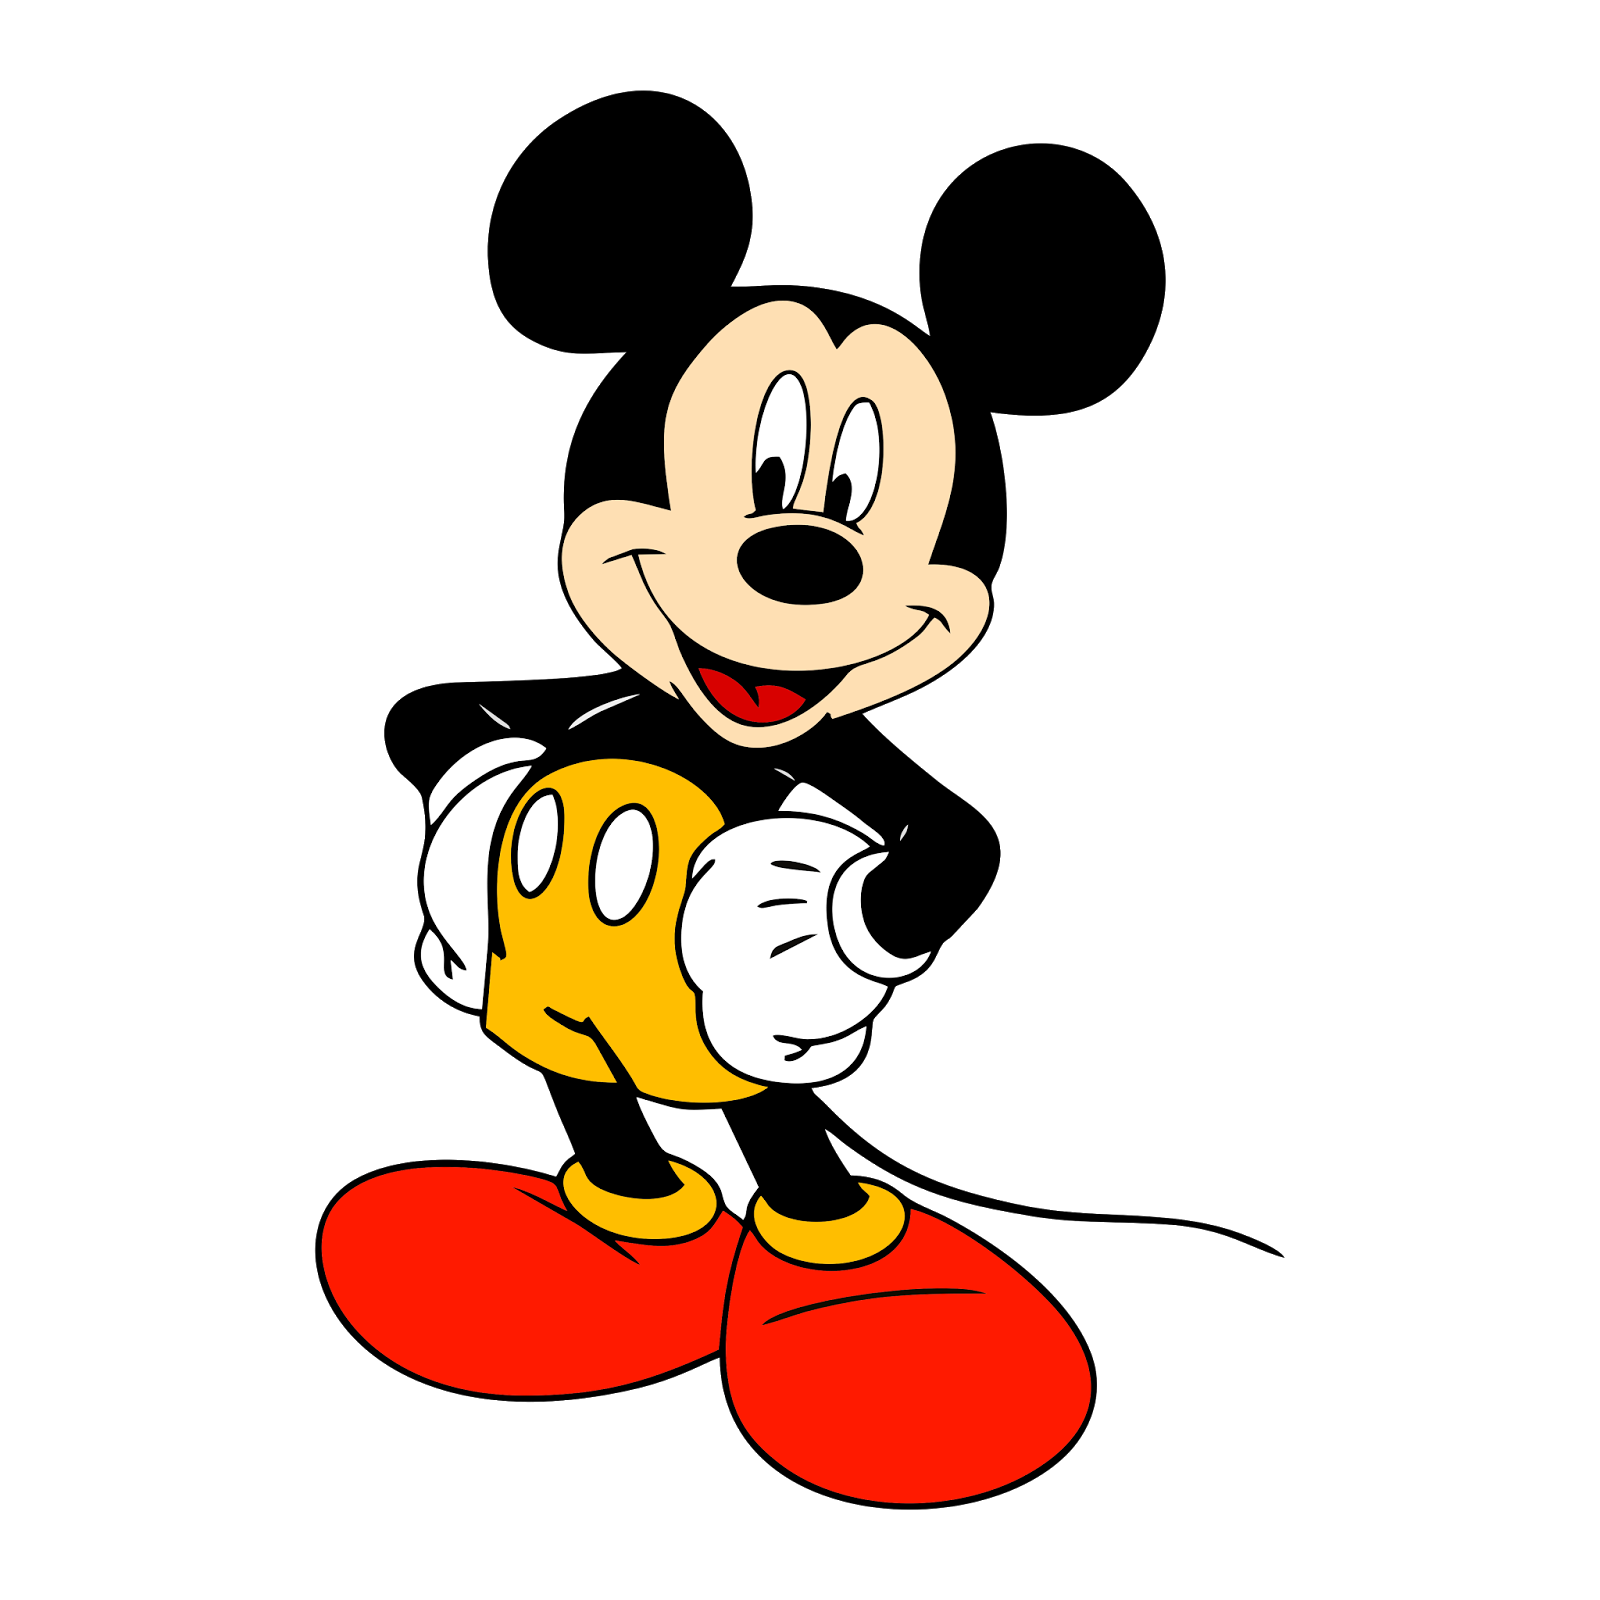 Mickey mouse vector free download for windows 10